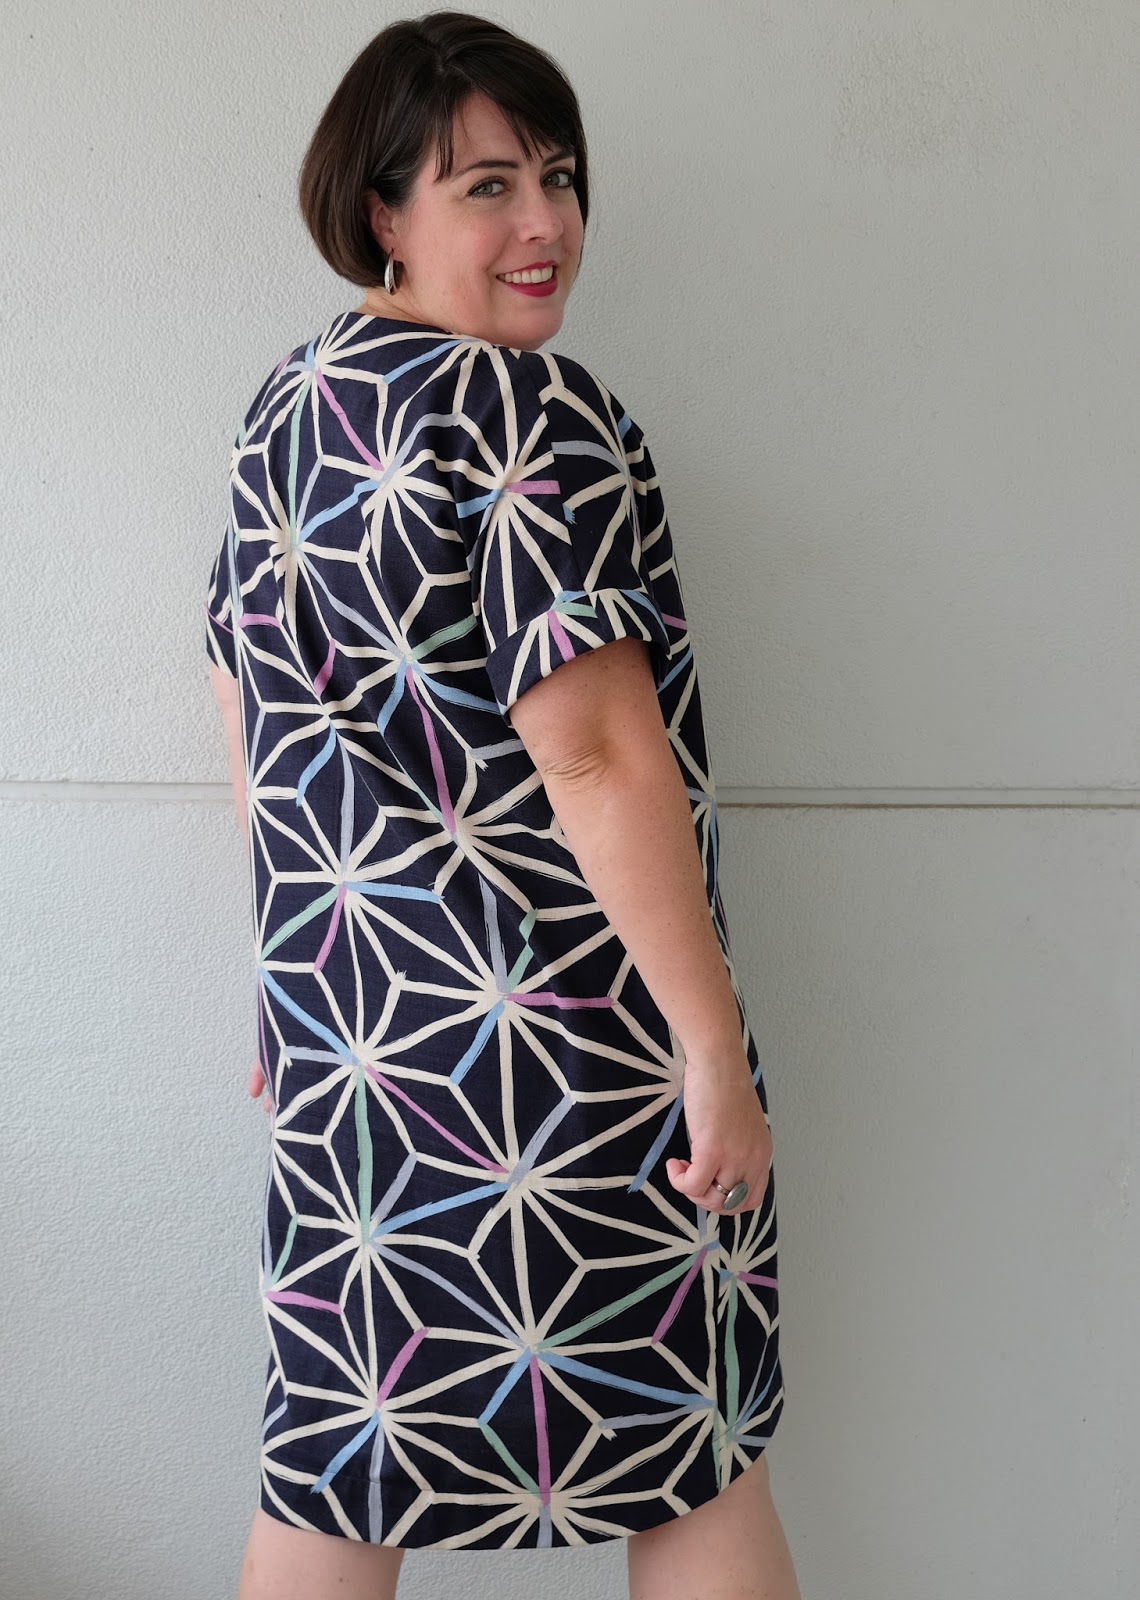 Cookin' & Craftin': Day and Night Dress Challenge: Adeline and Marilyn